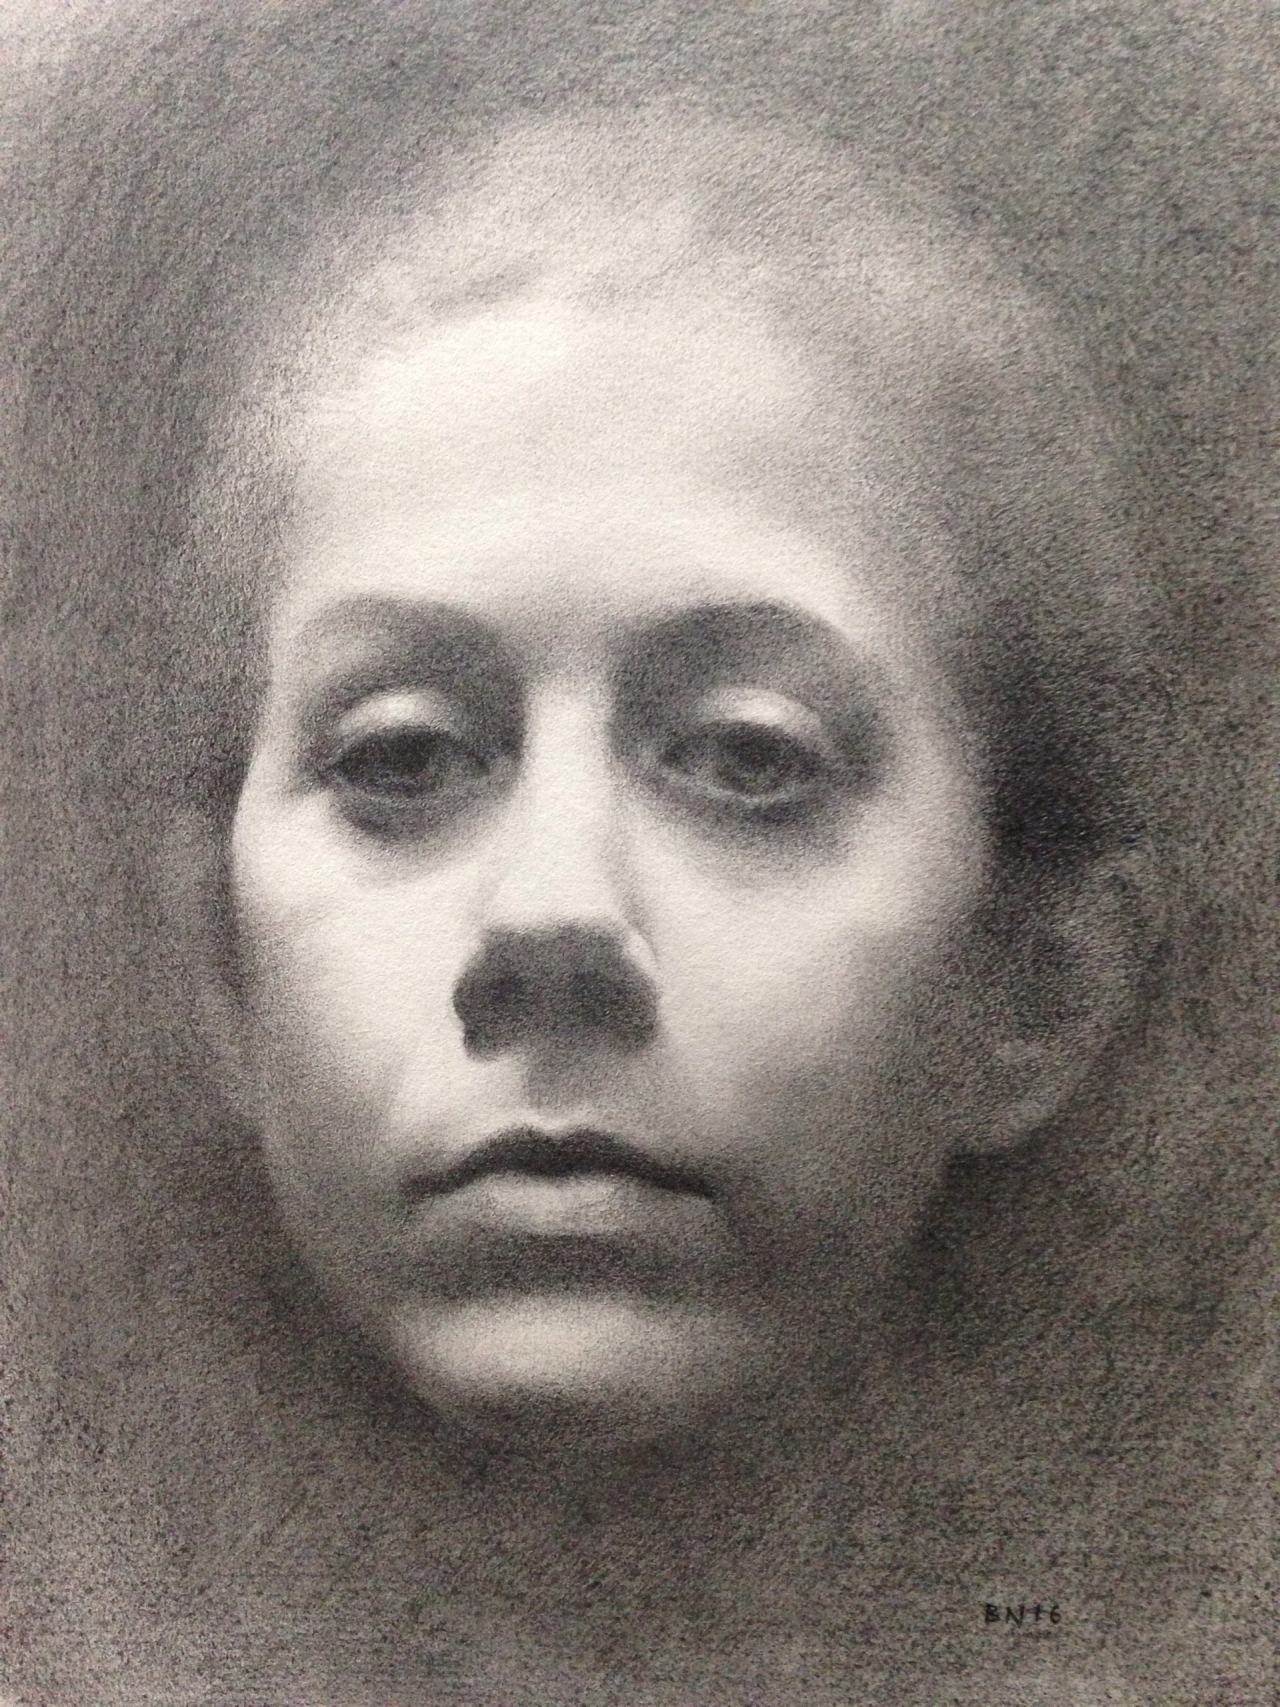 I worked some more on this graphite self portrait.